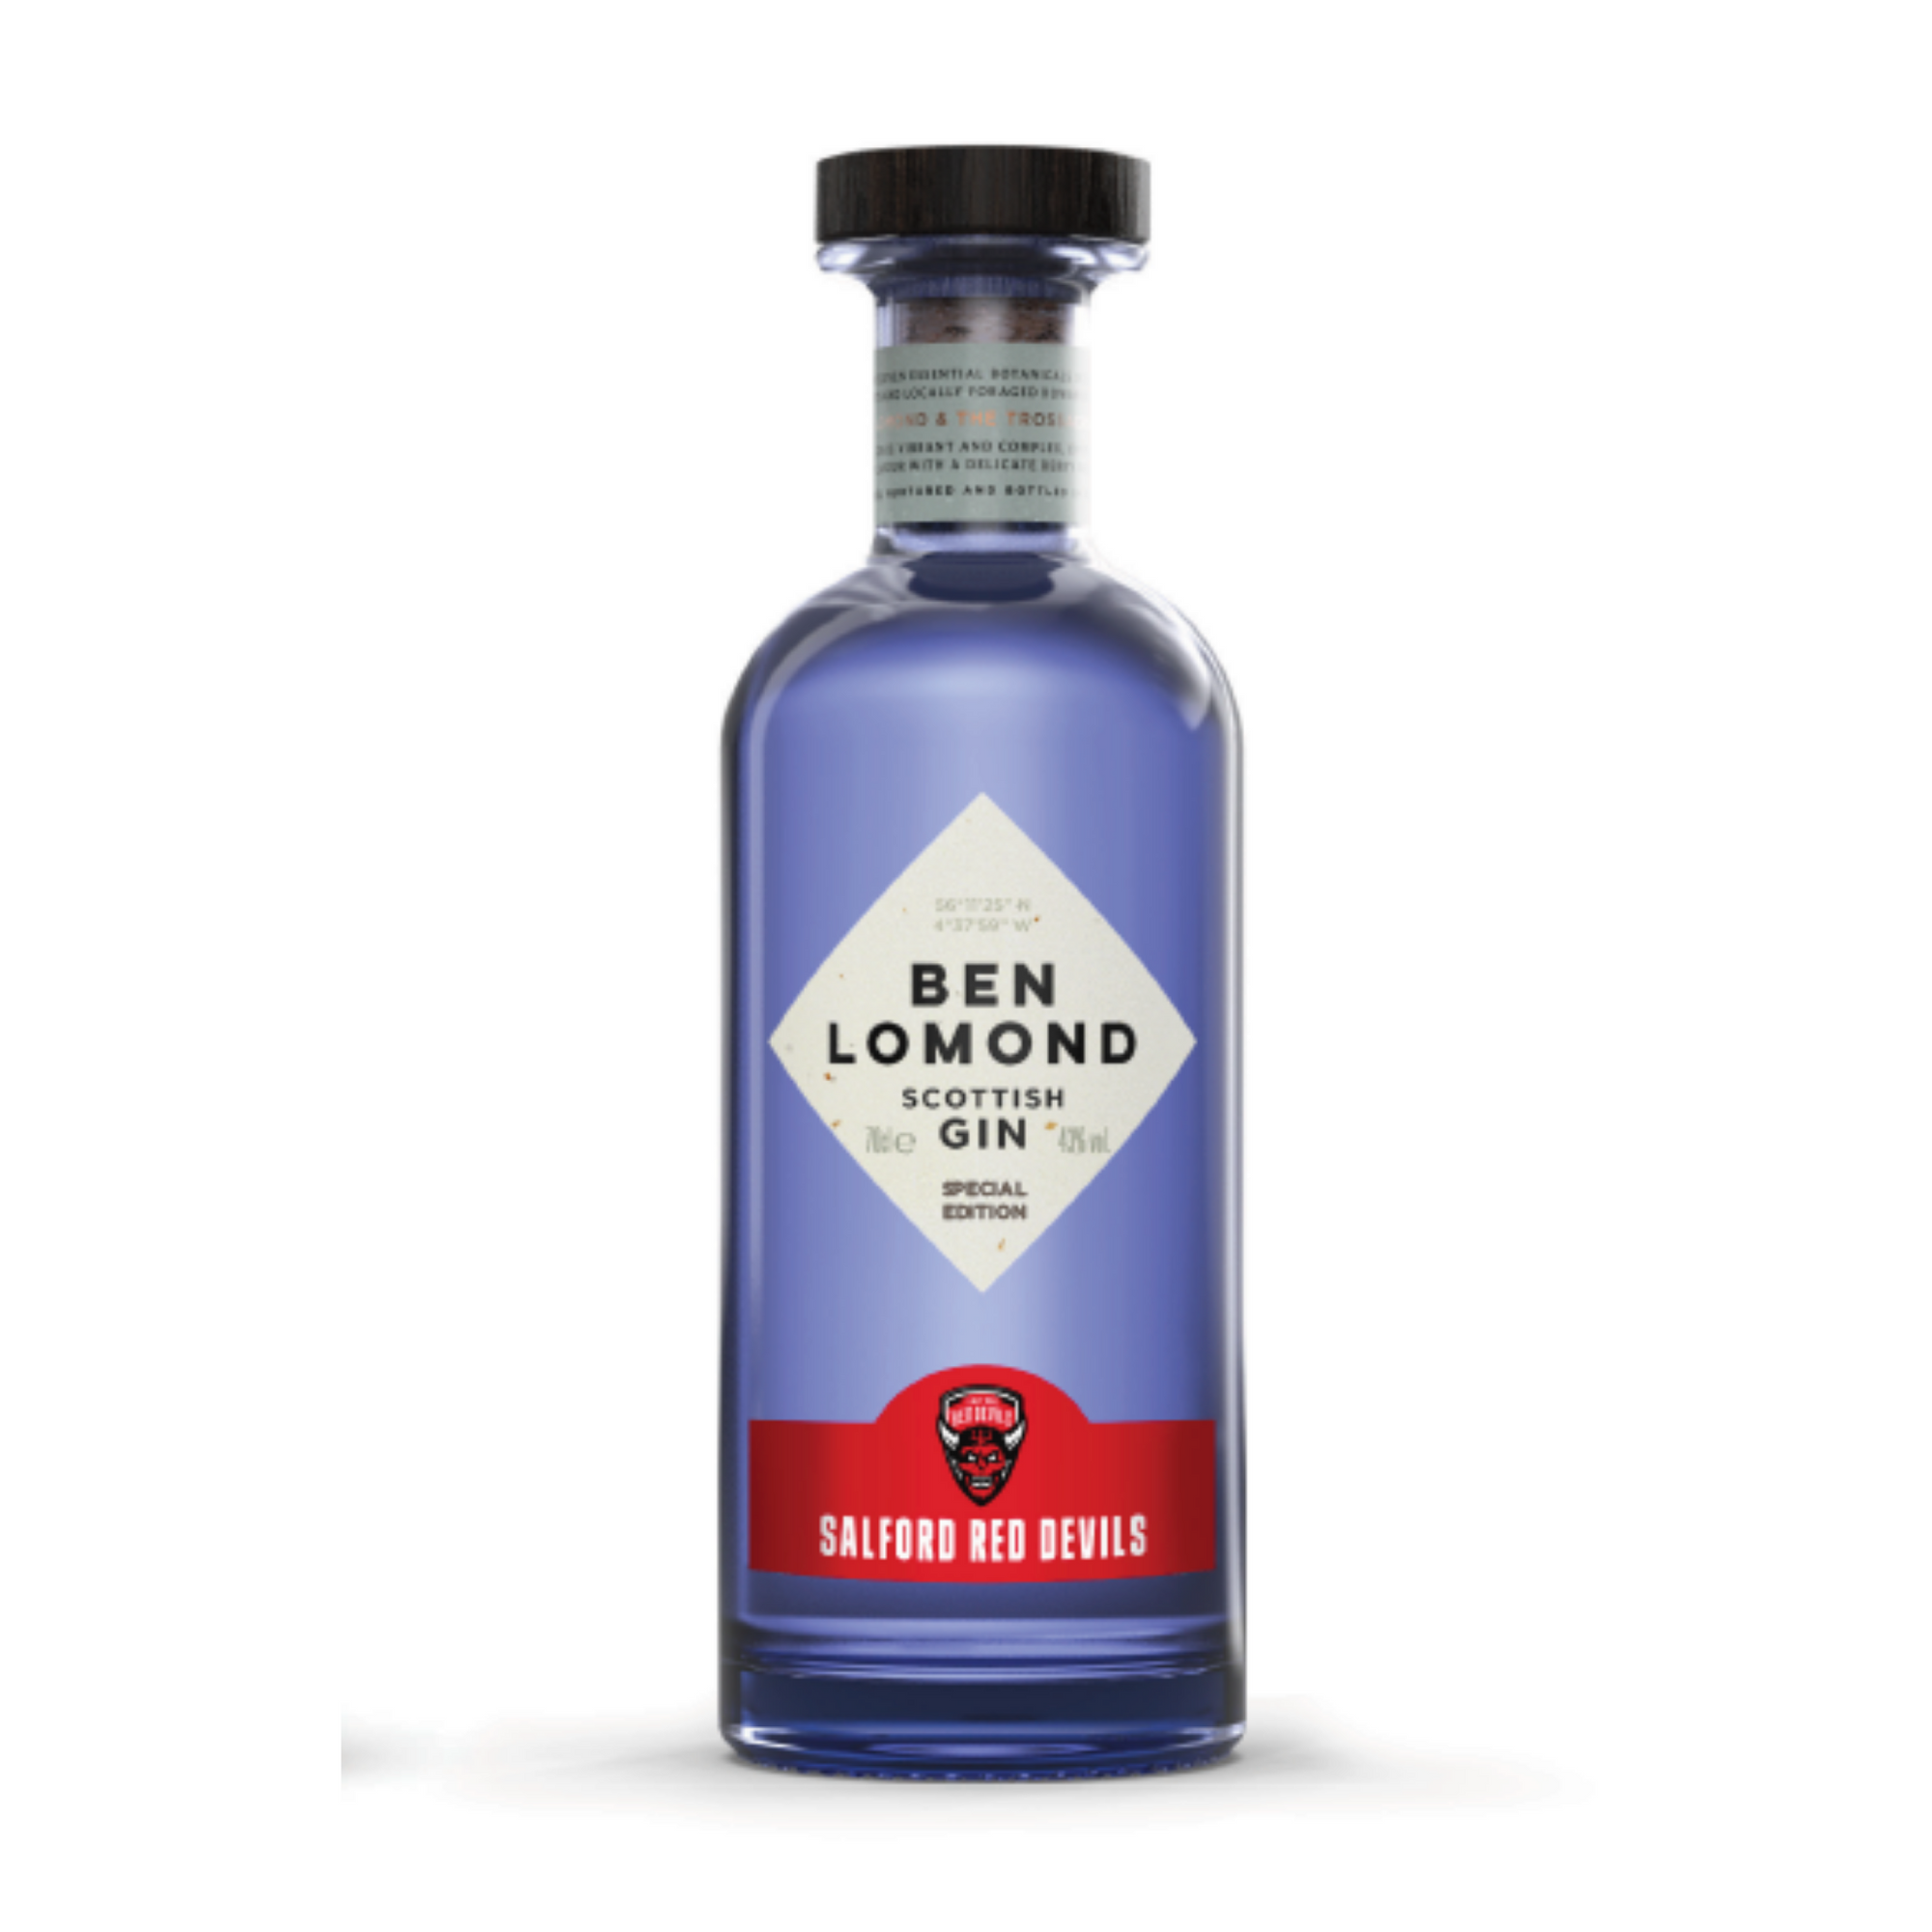 Salford Red Devils Special Edition Gin